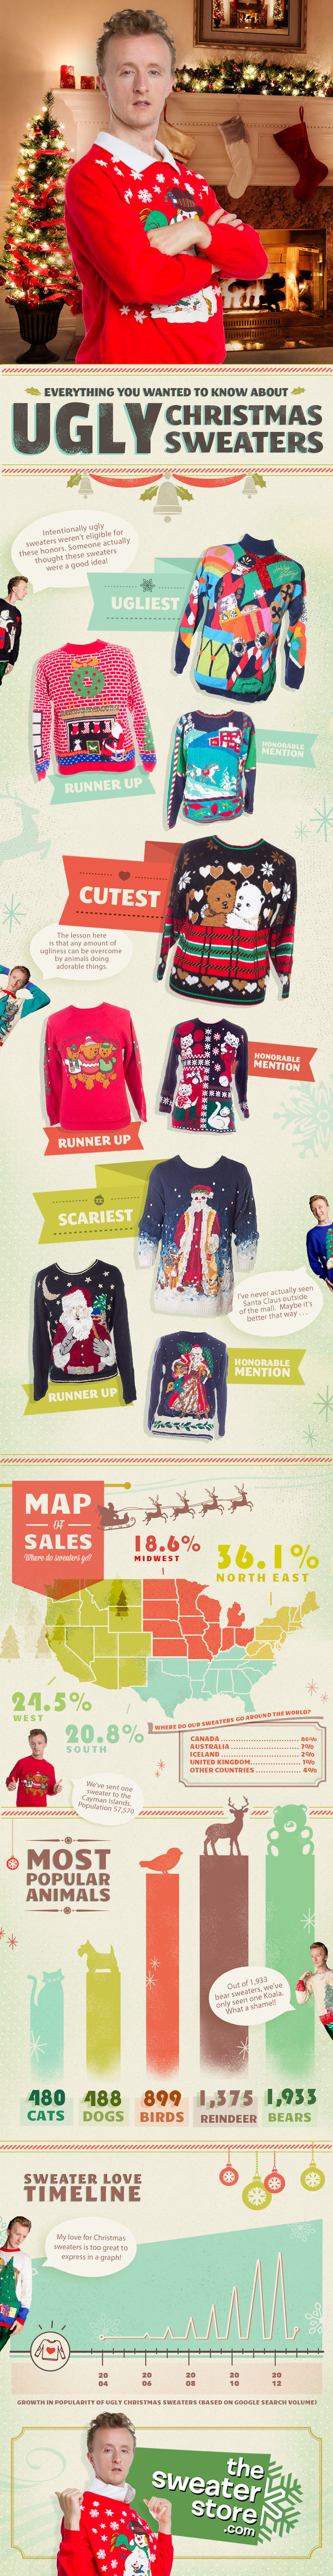 Everything You Wanted To Know About Ugly Christmas Sweaters